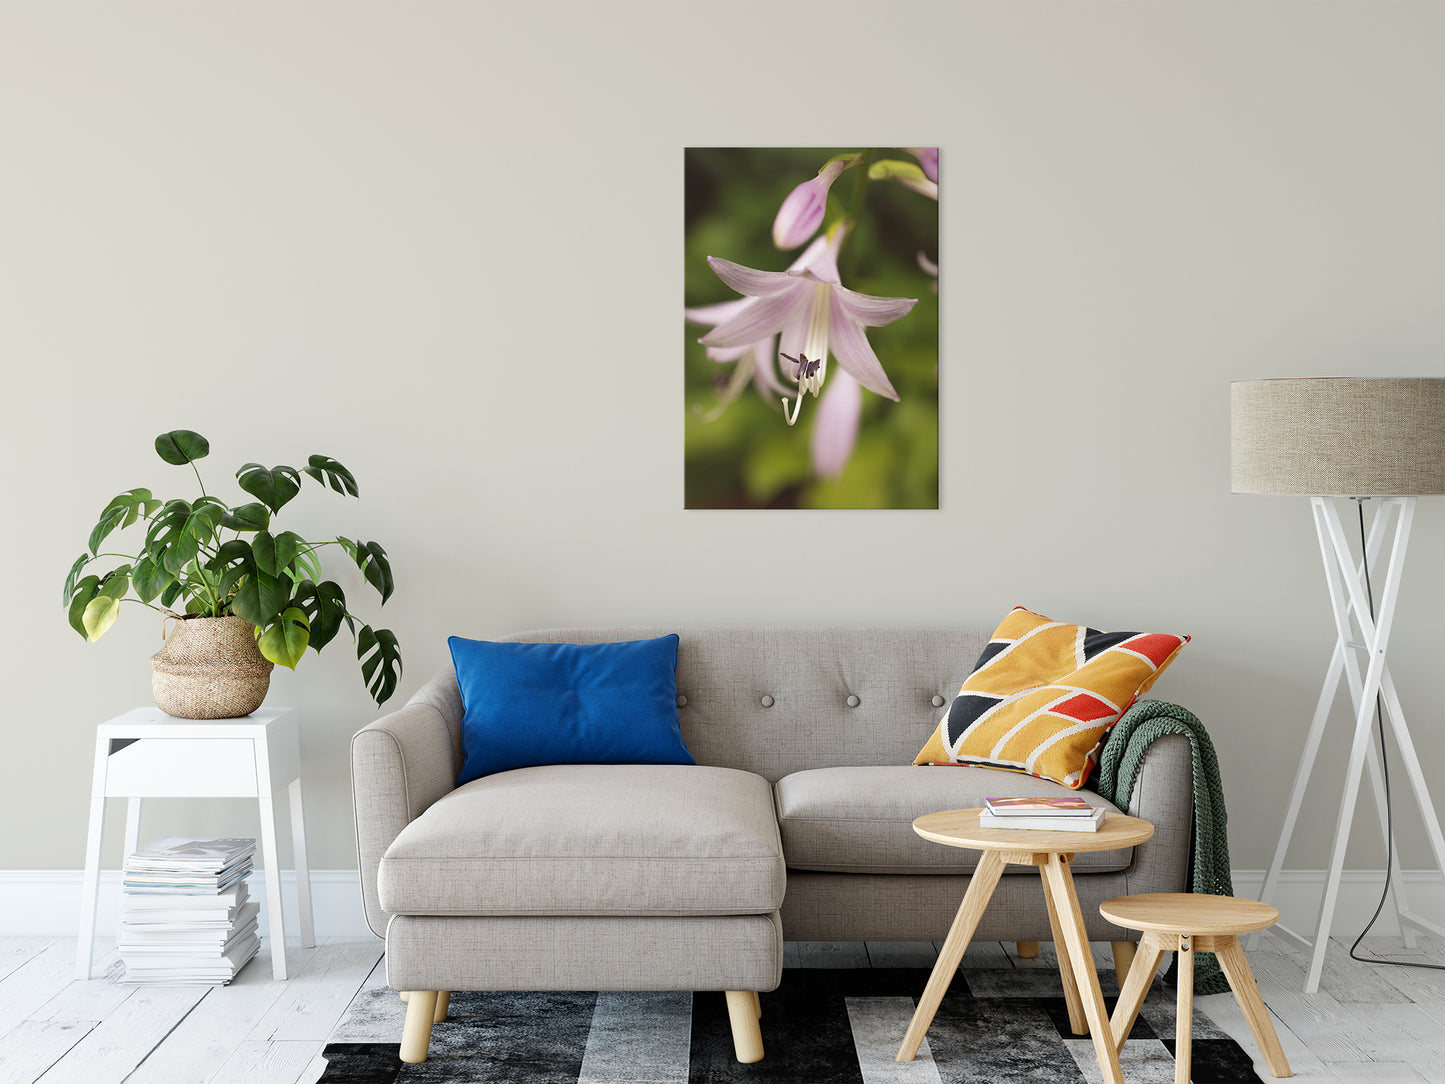 Softened Hosta Bloom Nature / Floral Photo Fine Art Canvas Wall Art Prints 24" x 36" - PIPAFINEART